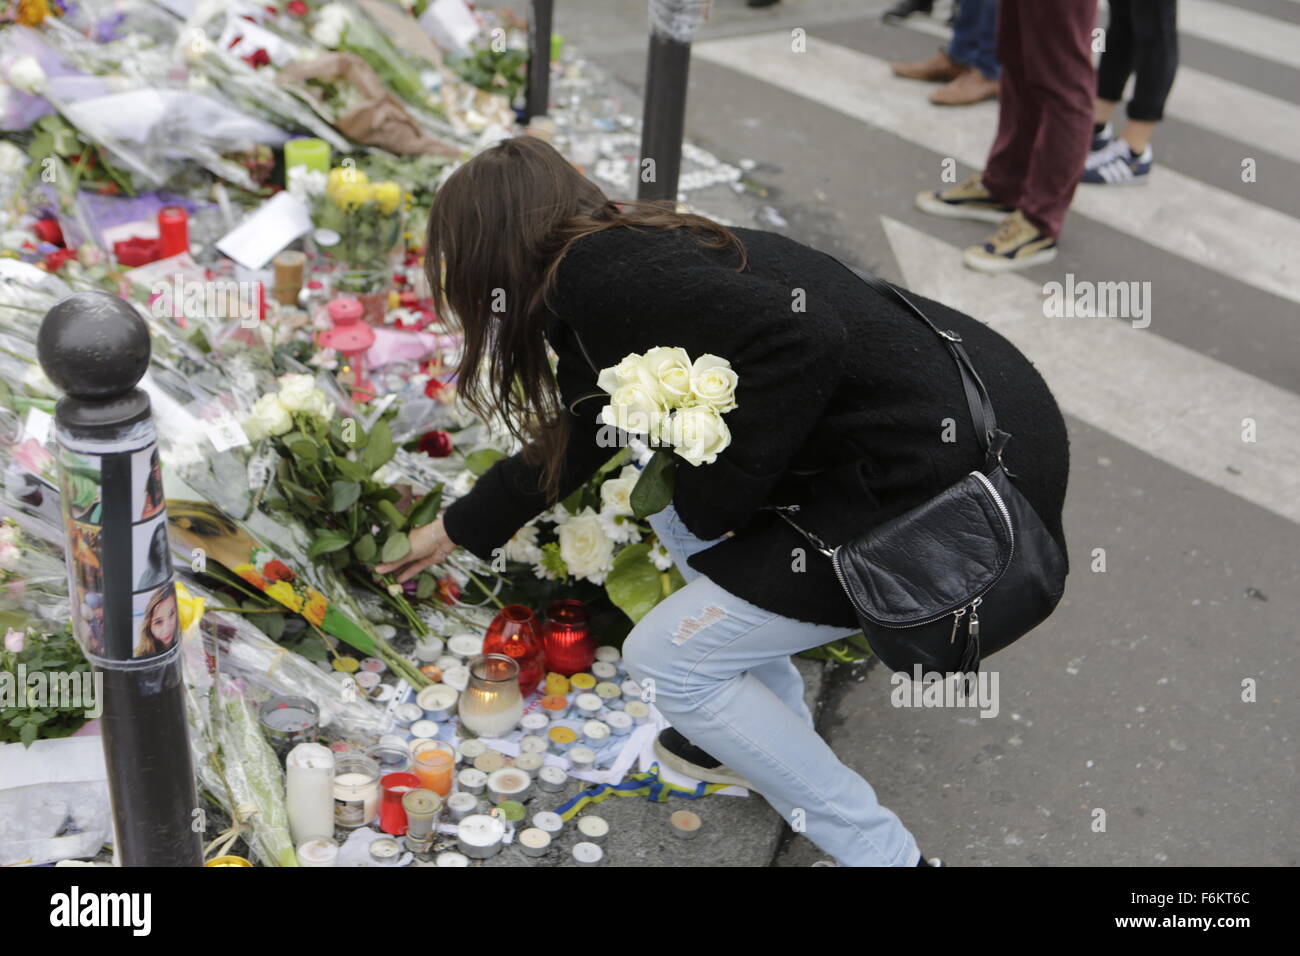 Paris, France. 17th November 2015. A woman places flowers at the memorial outside the restaurant Le Petit Cambodge for the people killed here during the Paris attacks. Parisians and tourists continue to visit the memorials for the people killed in the terrorists attacks in Paris, to lay down flowers and candles and to pay their respect. Over 130 people have been by terrorist from the Islamic State. Stock Photo